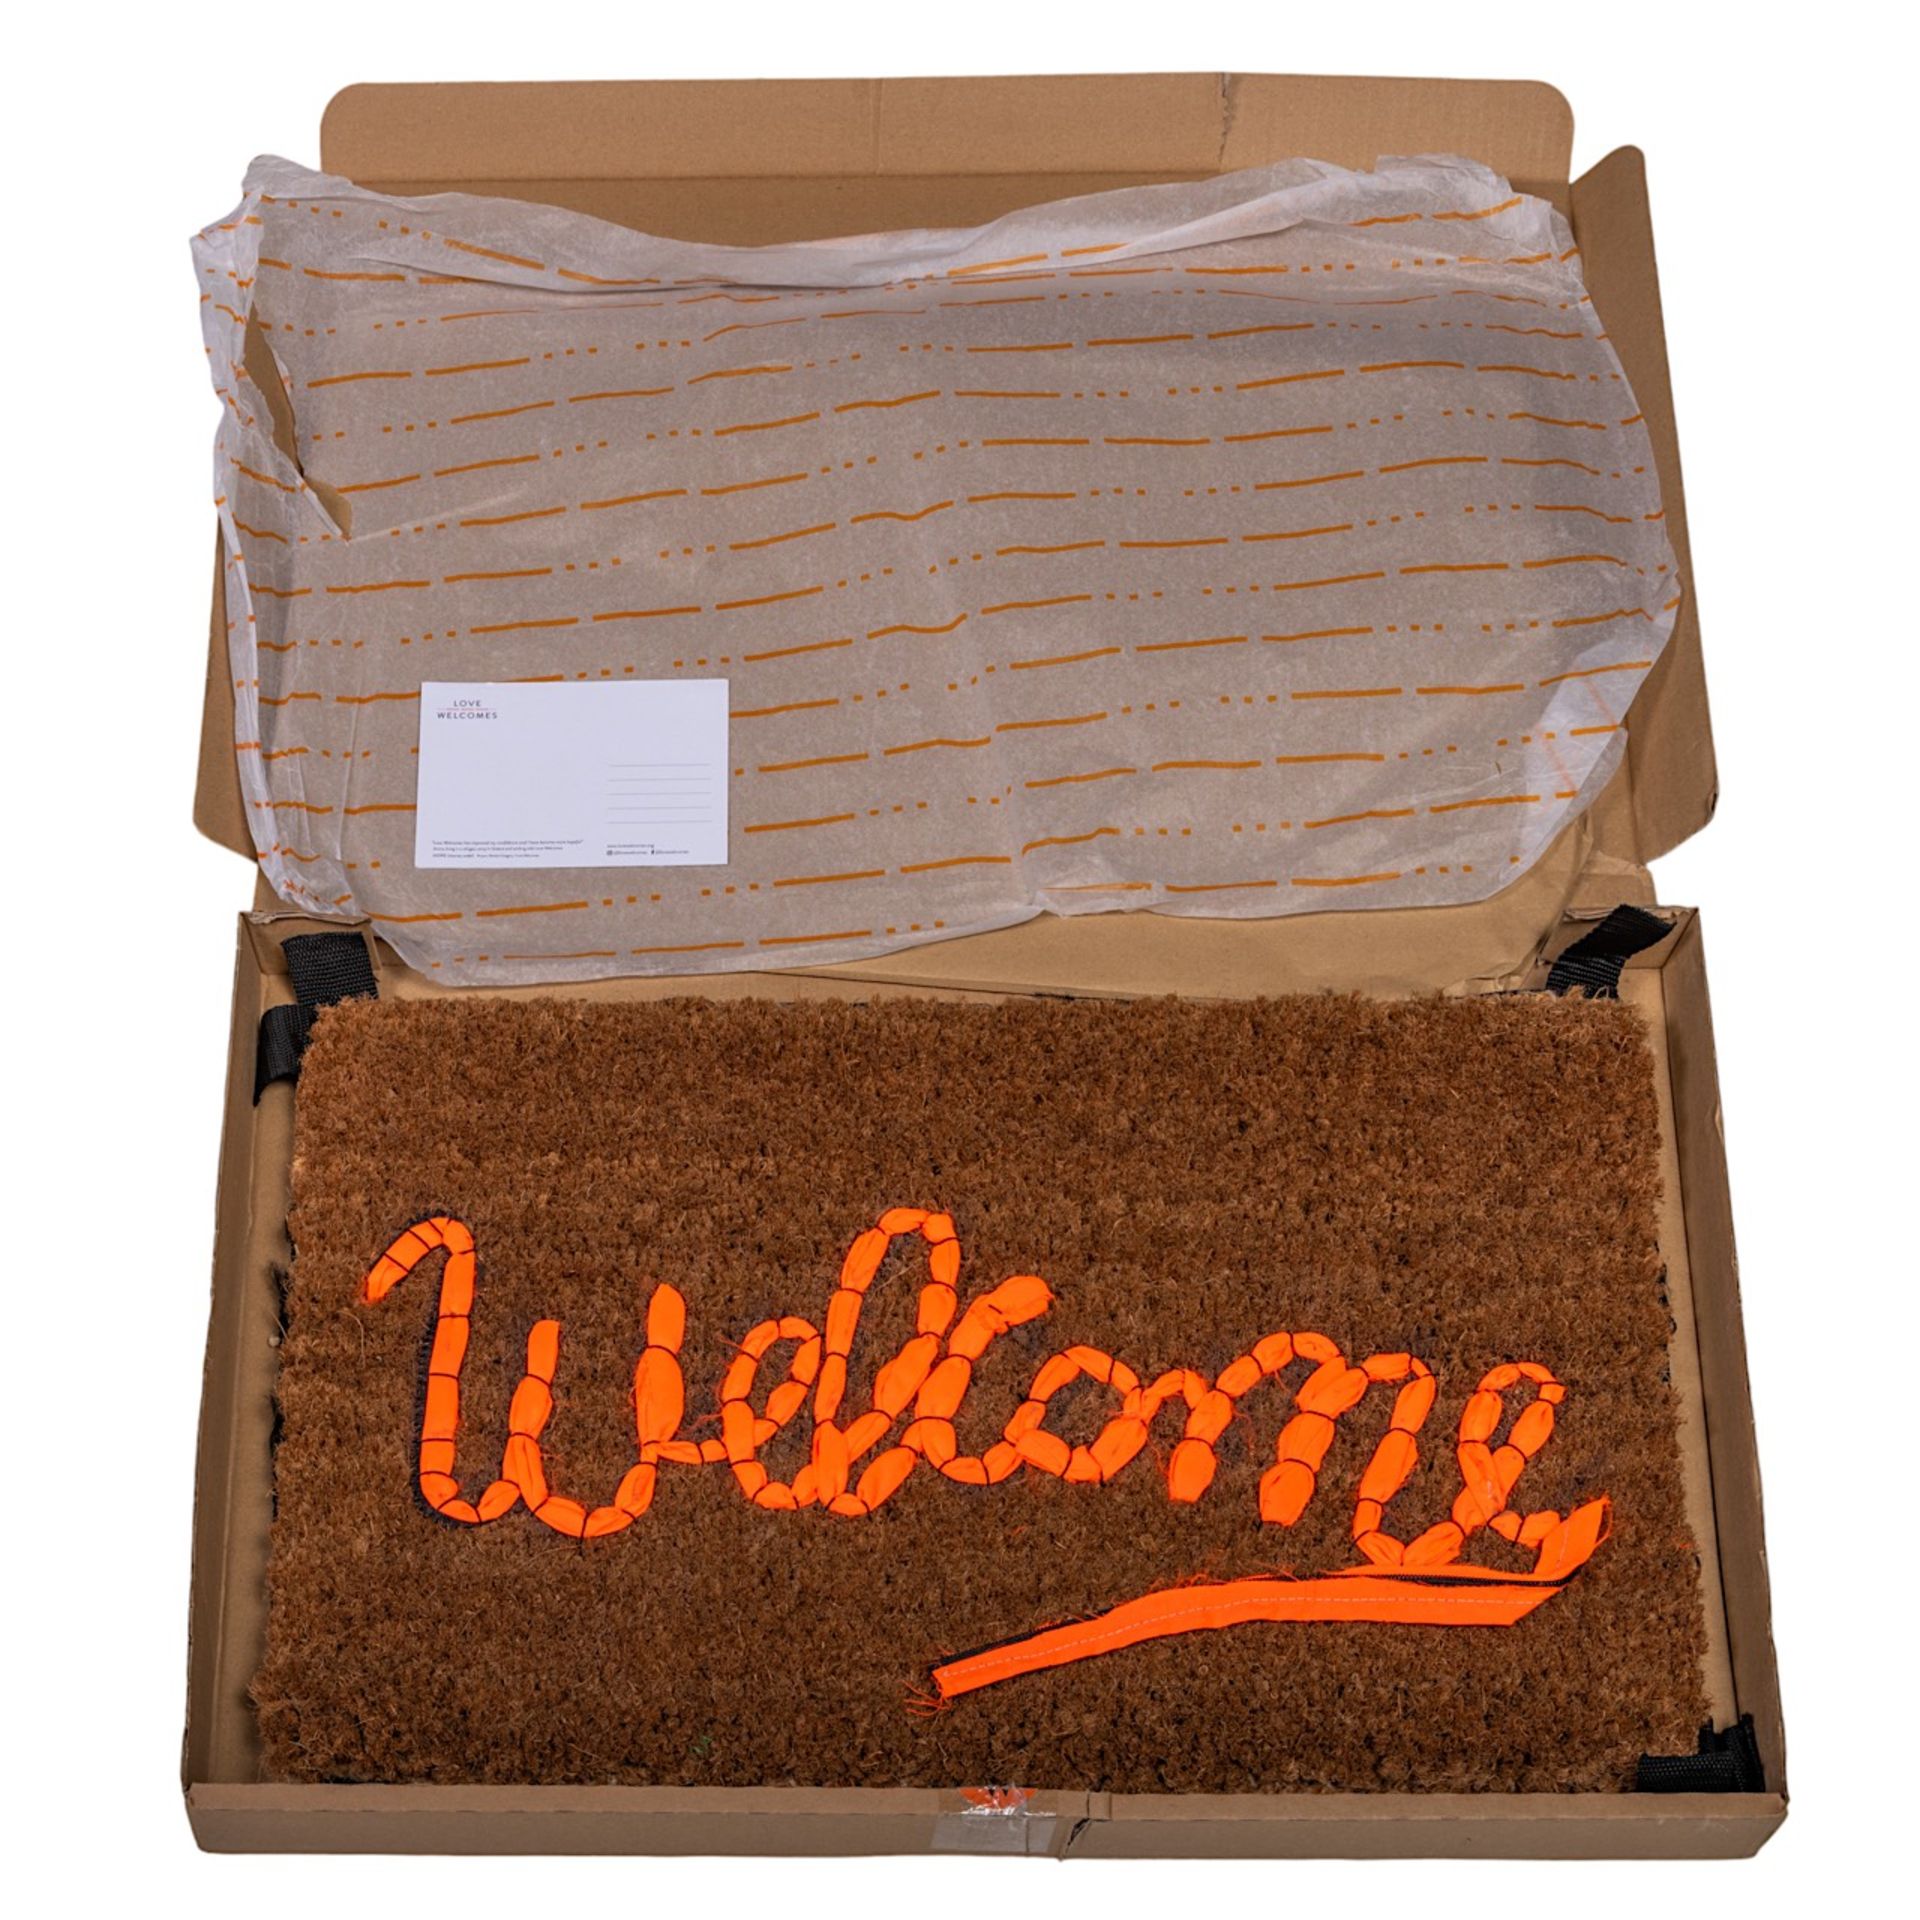 Banksy (1974), Welcome mat, edition by 'Gross Domestic Product', Ndeg 2316 40 x 60 cm. (15 3/4 x 23. - Image 5 of 7